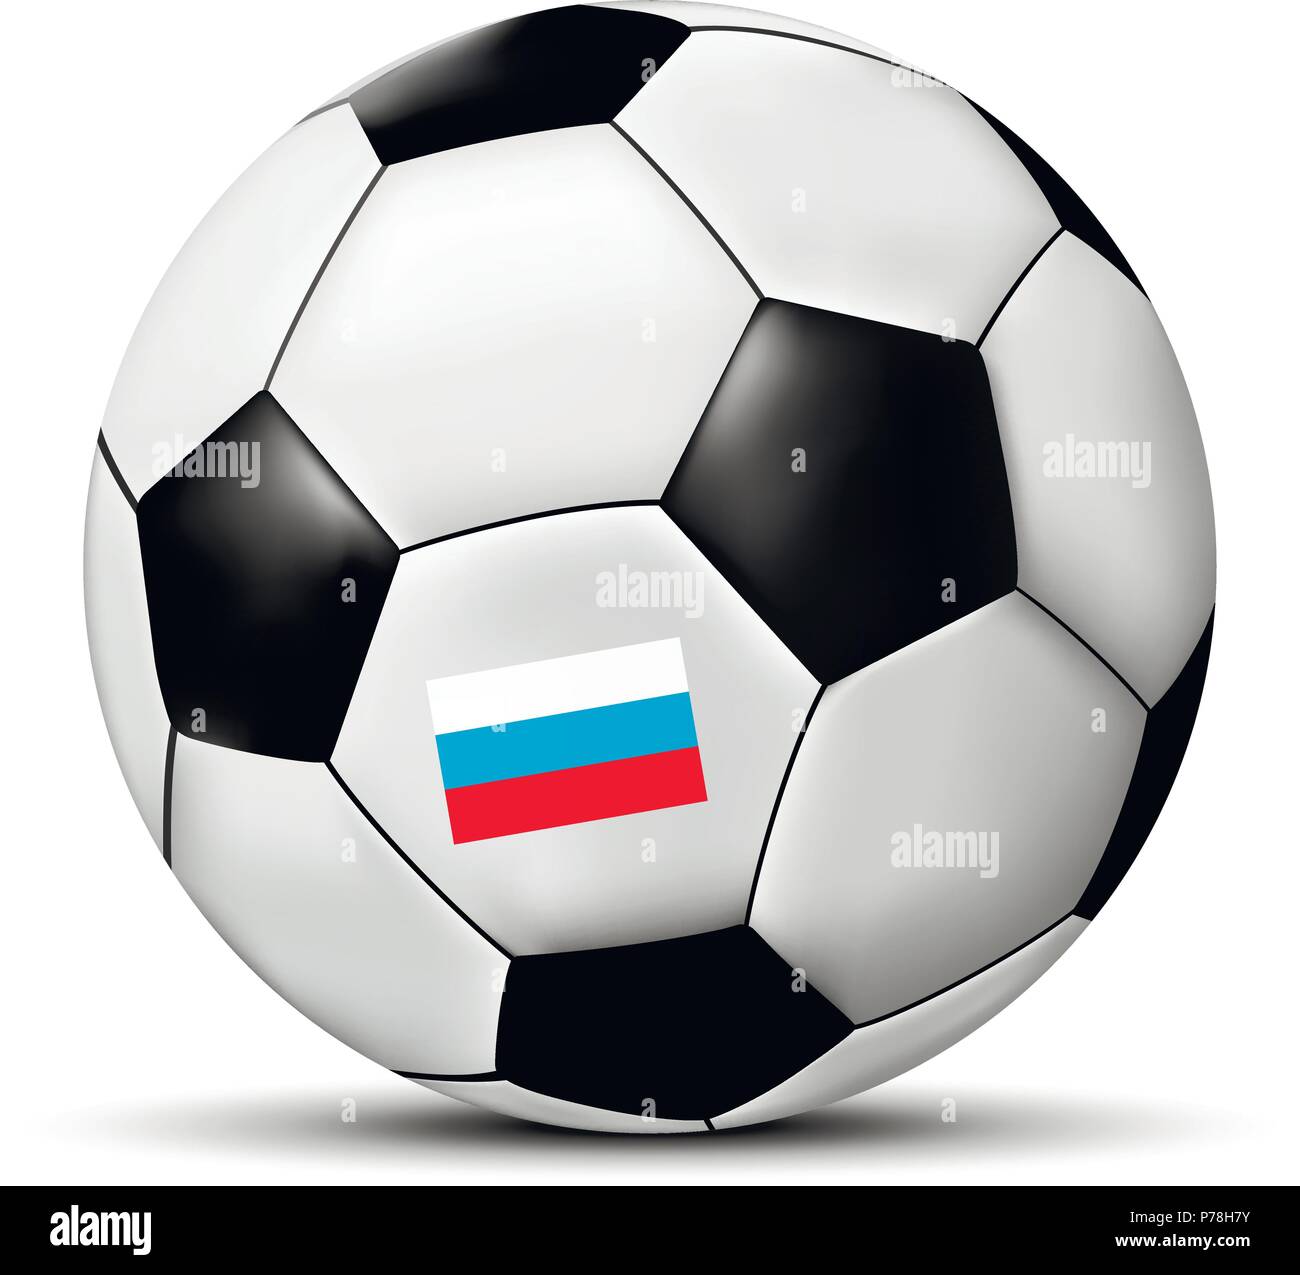 Football or soccer ball with Russia flag. Vector illustration. Stock Vector